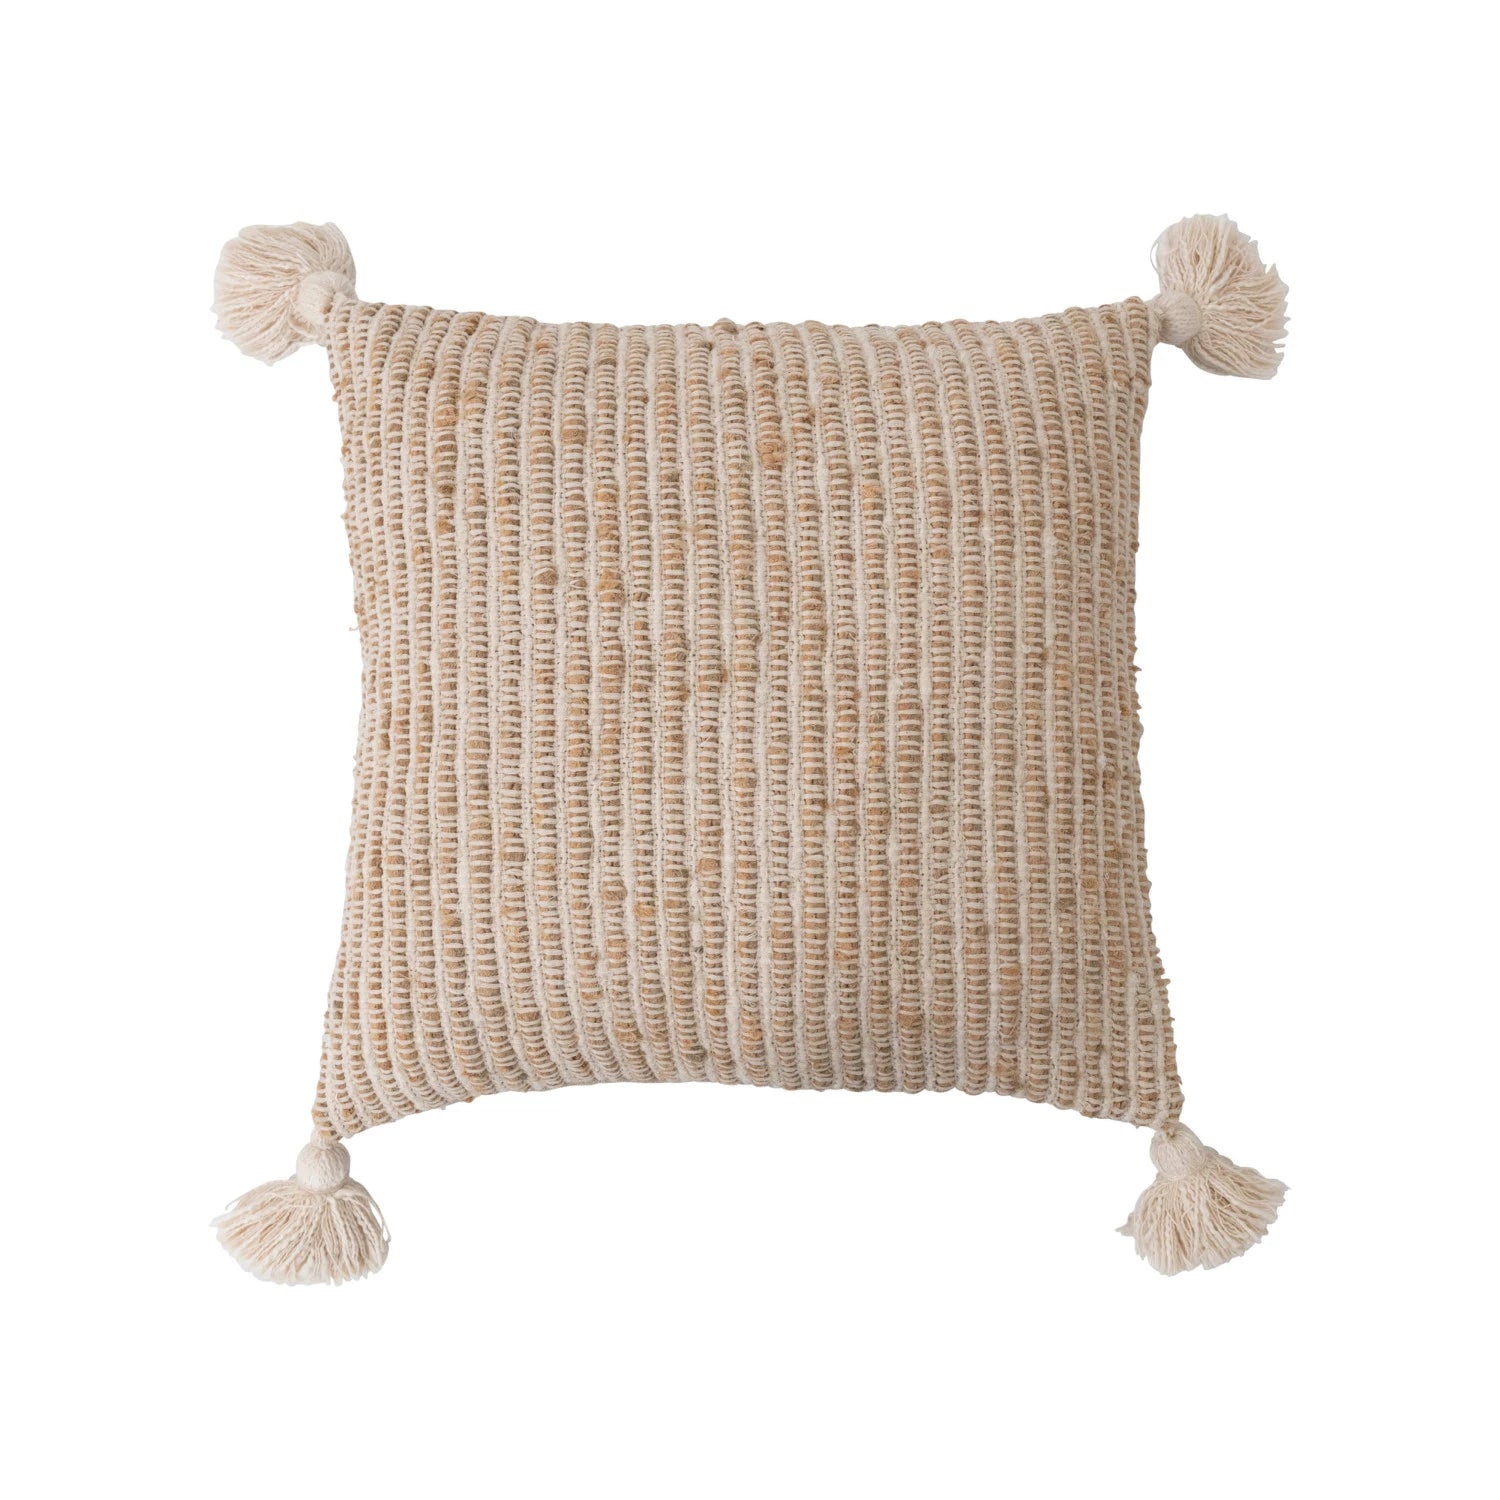 DF5853  20" Woven Cotton Striped Pillow w/ Tassels, Polyester Fill